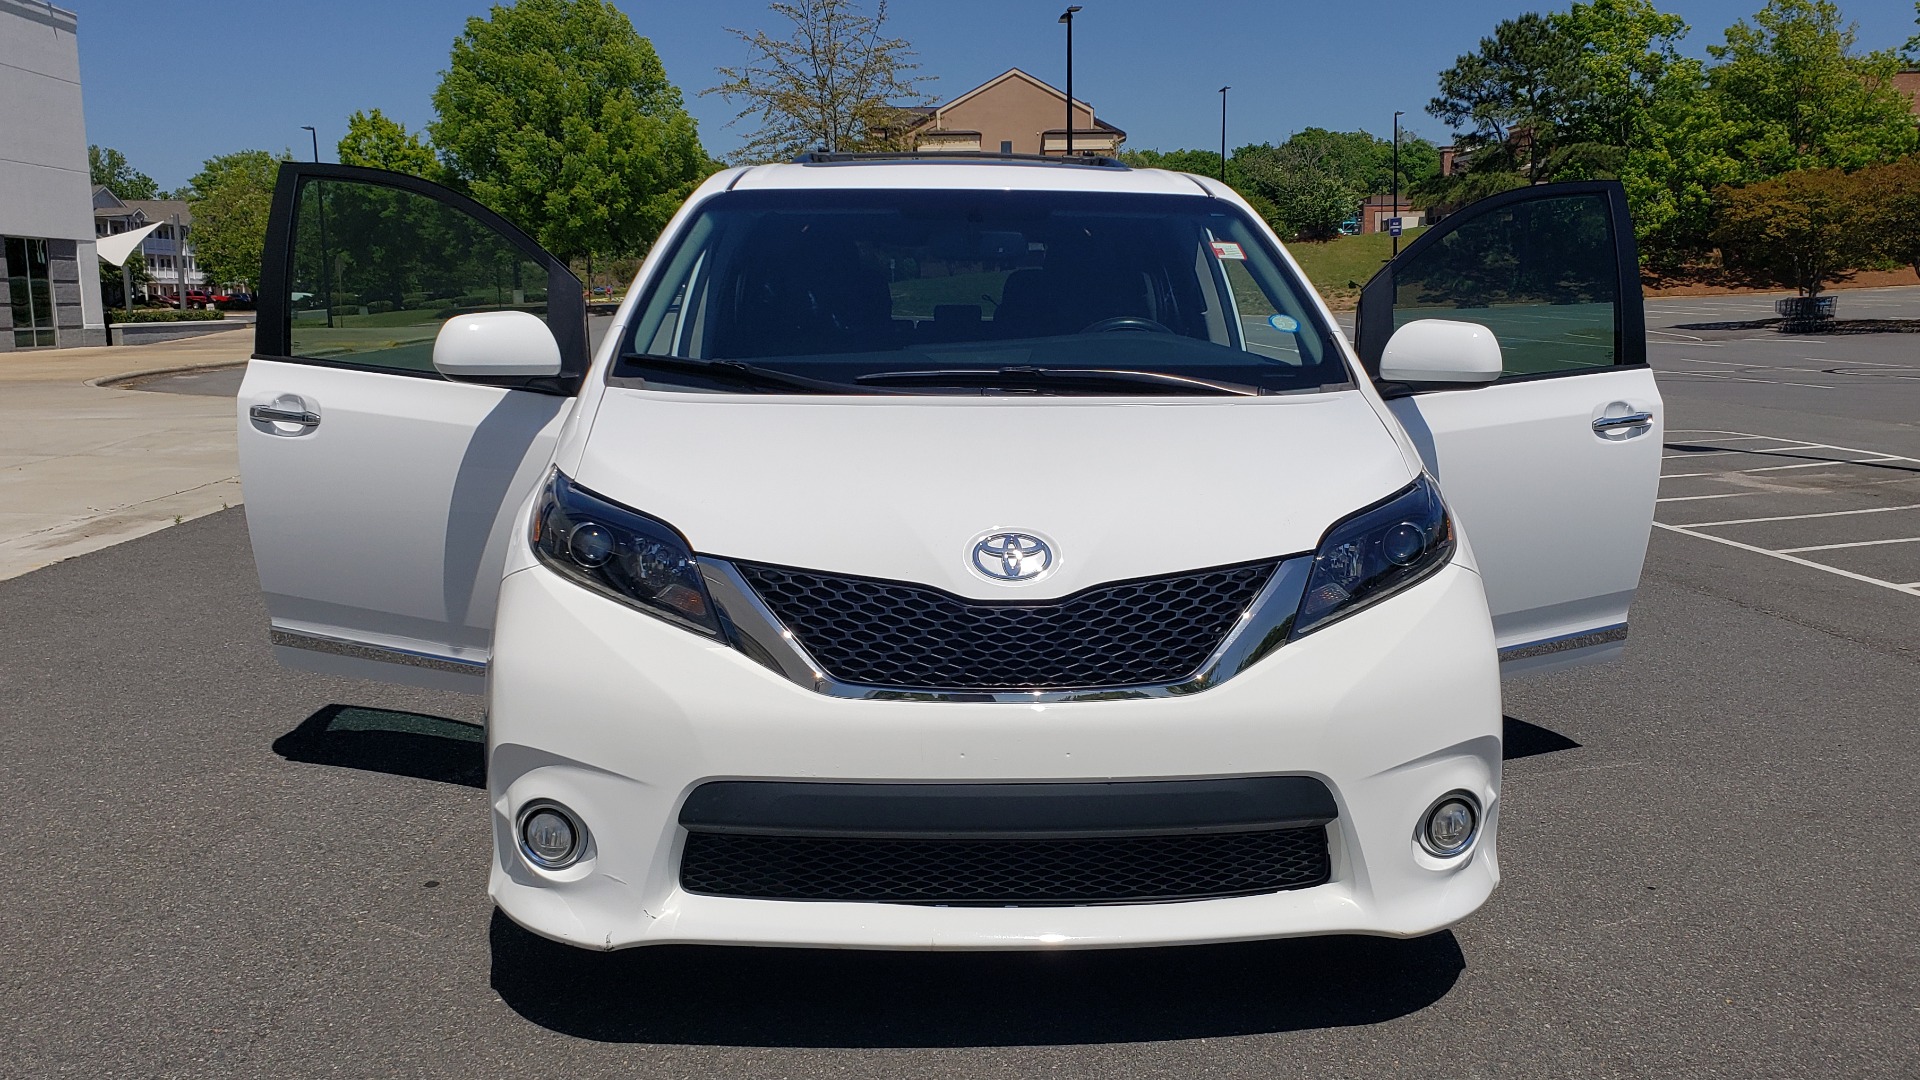 Used 2015 Toyota SIENNA SE 3.5L / FWD / 3-ROWS / 8-PASS / SUNROOF / DVD / REARVIEW for sale Sold at Formula Imports in Charlotte NC 28227 22